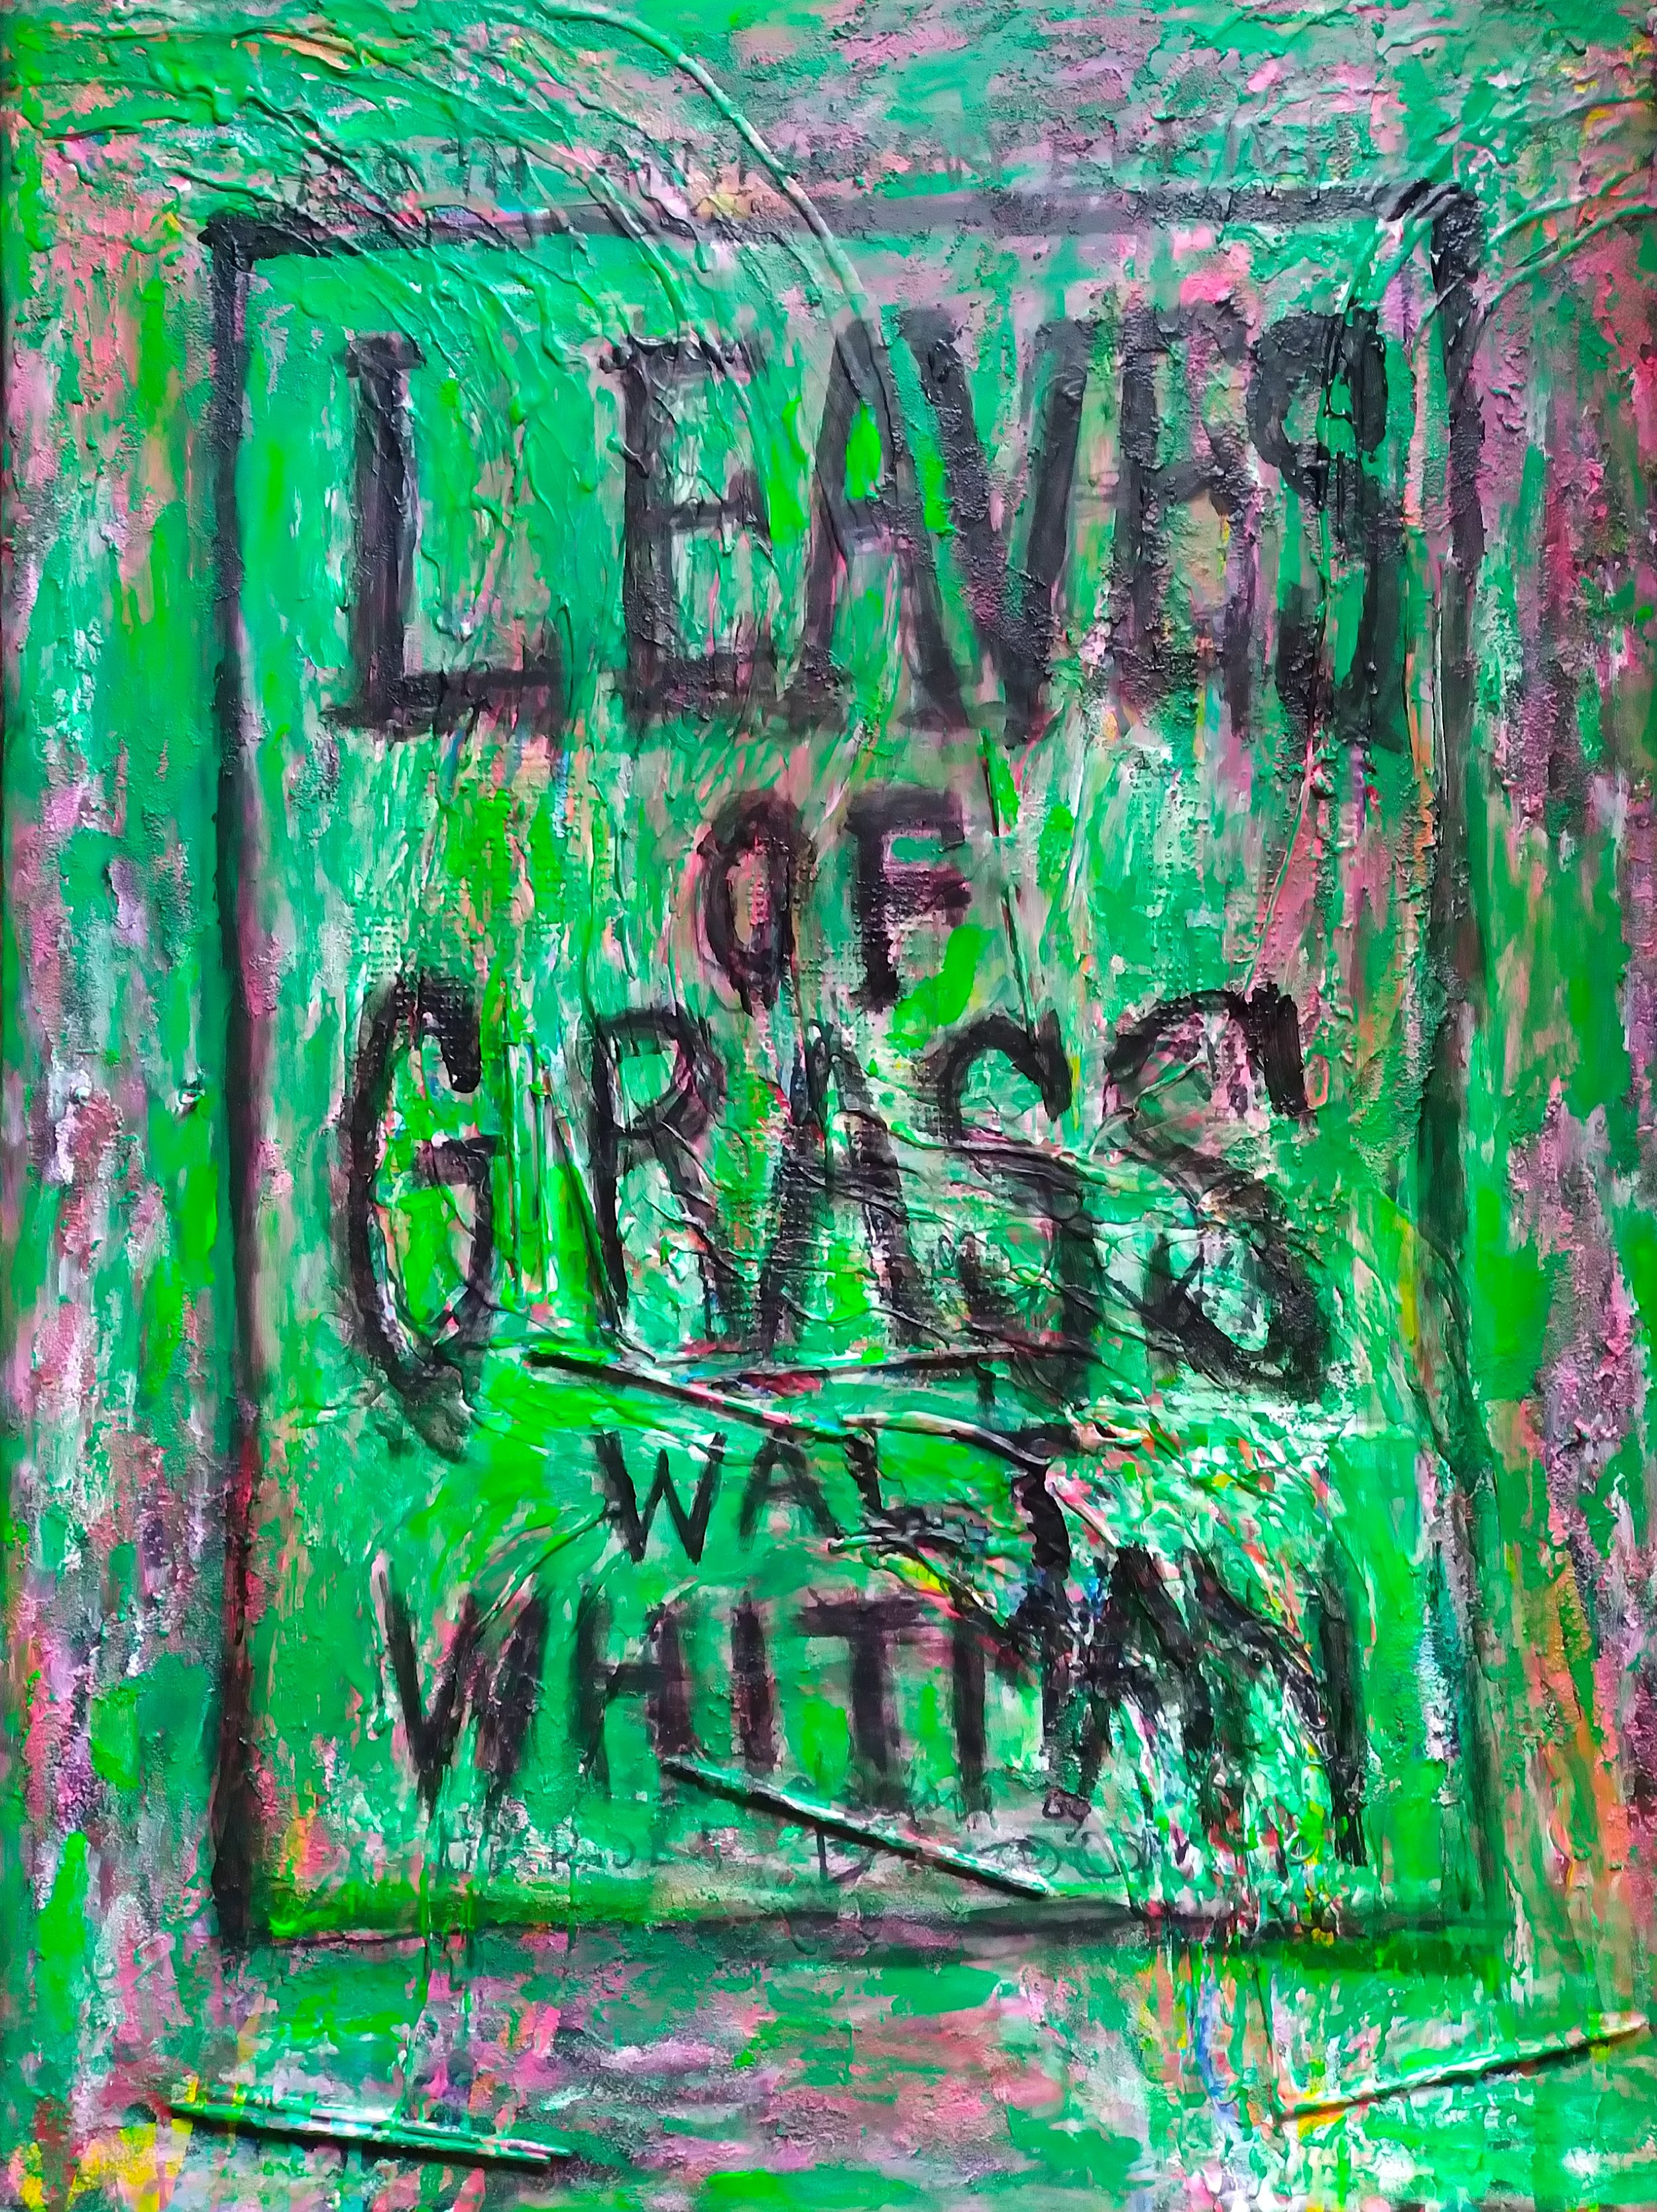 Leaves of Grass, 2004. Oil, acrylic, mixed media on canvas. 48” x 32”.